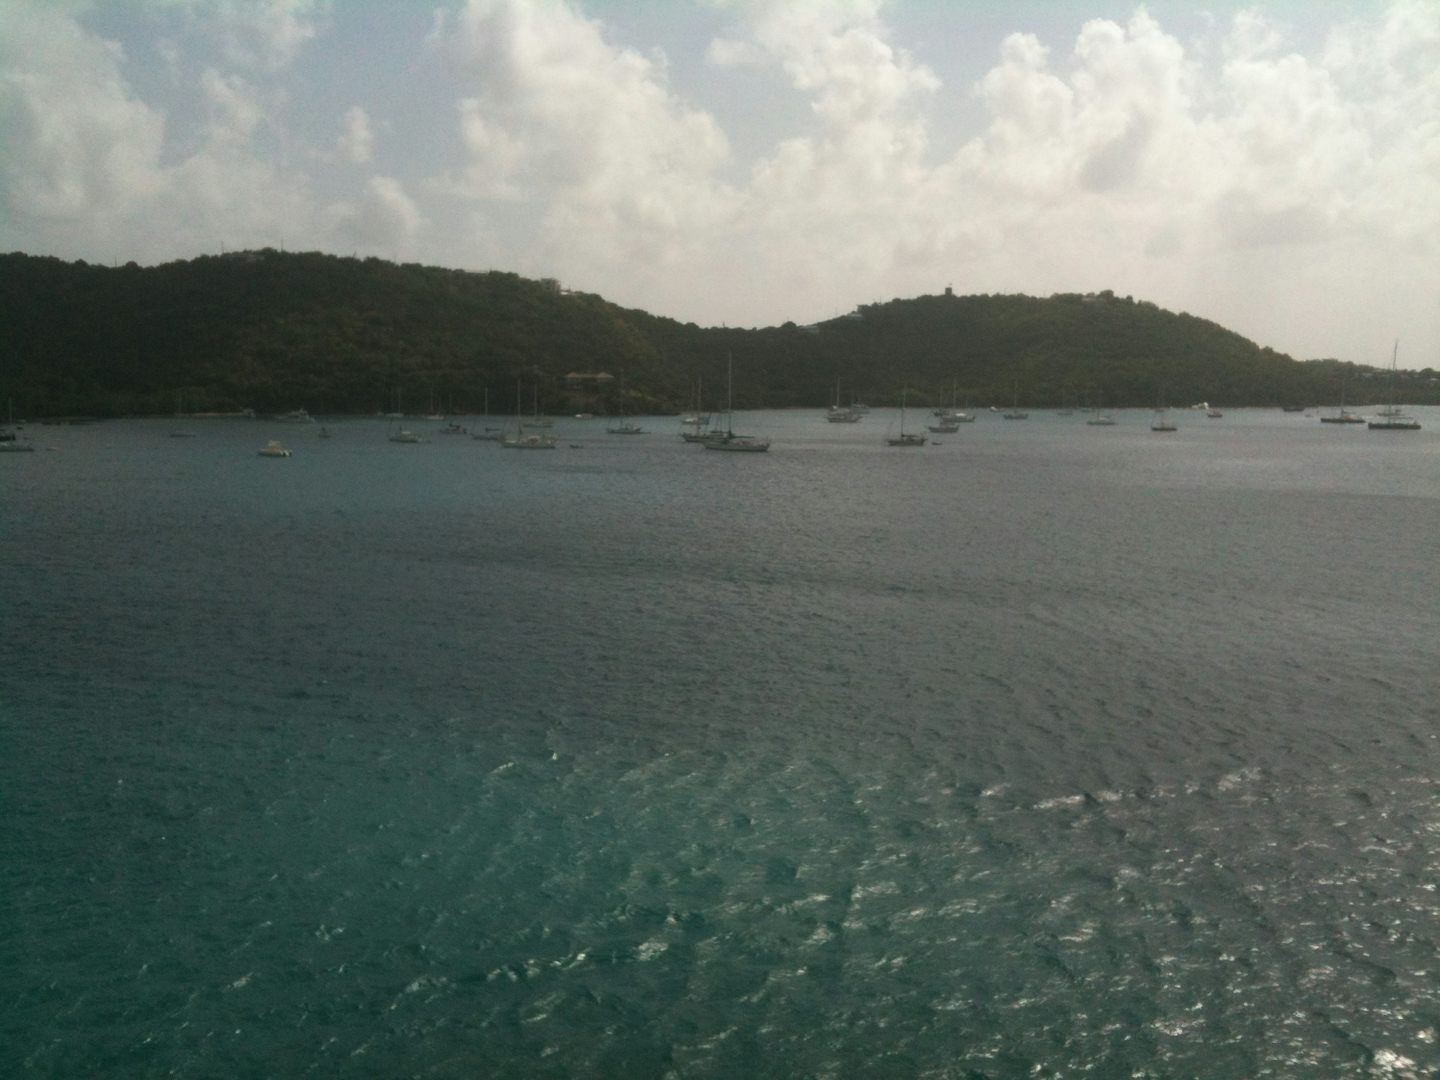 View from our stateroom docked in St. Thomas.